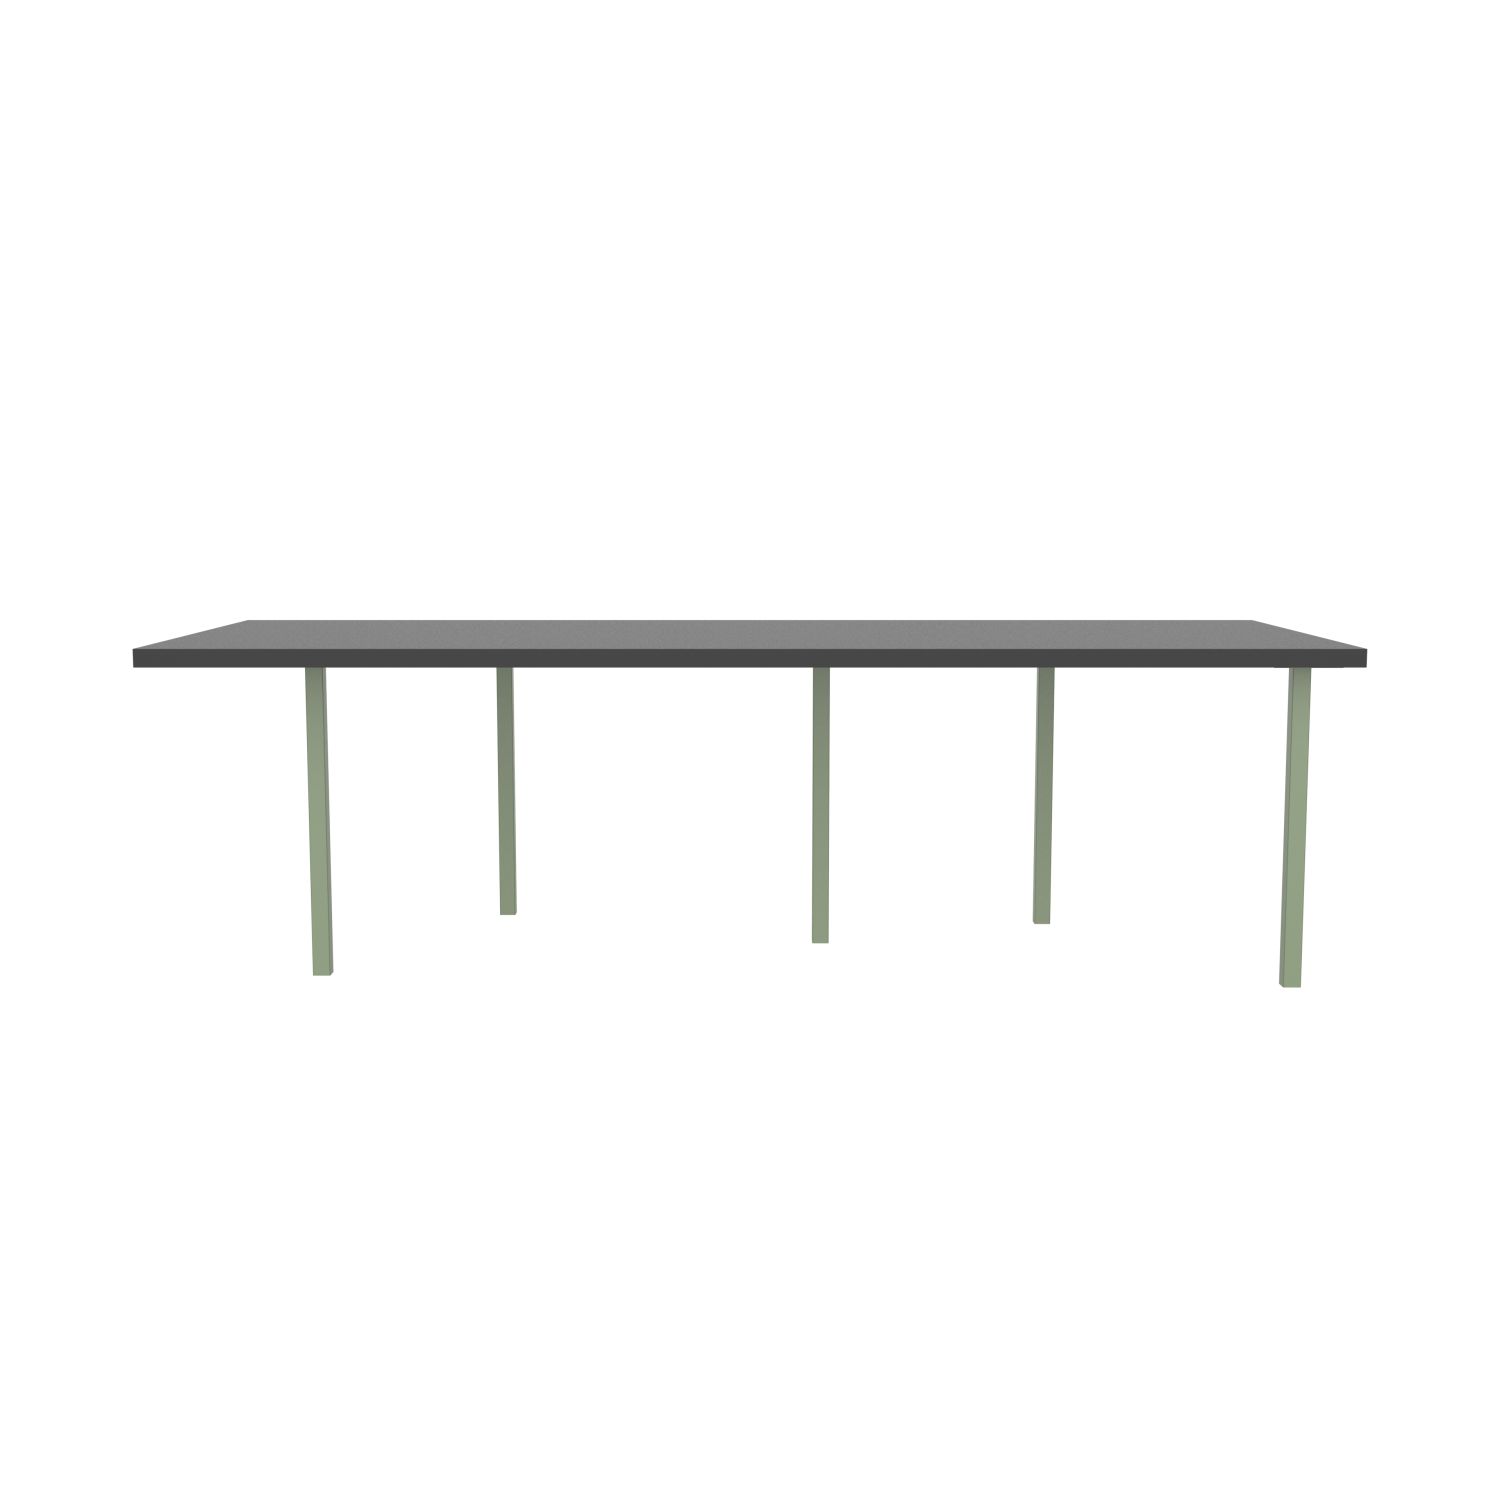 lensvelt bbrand table five fixed heigt 103x264 hpl black 50 mm price level 1 green ral6021